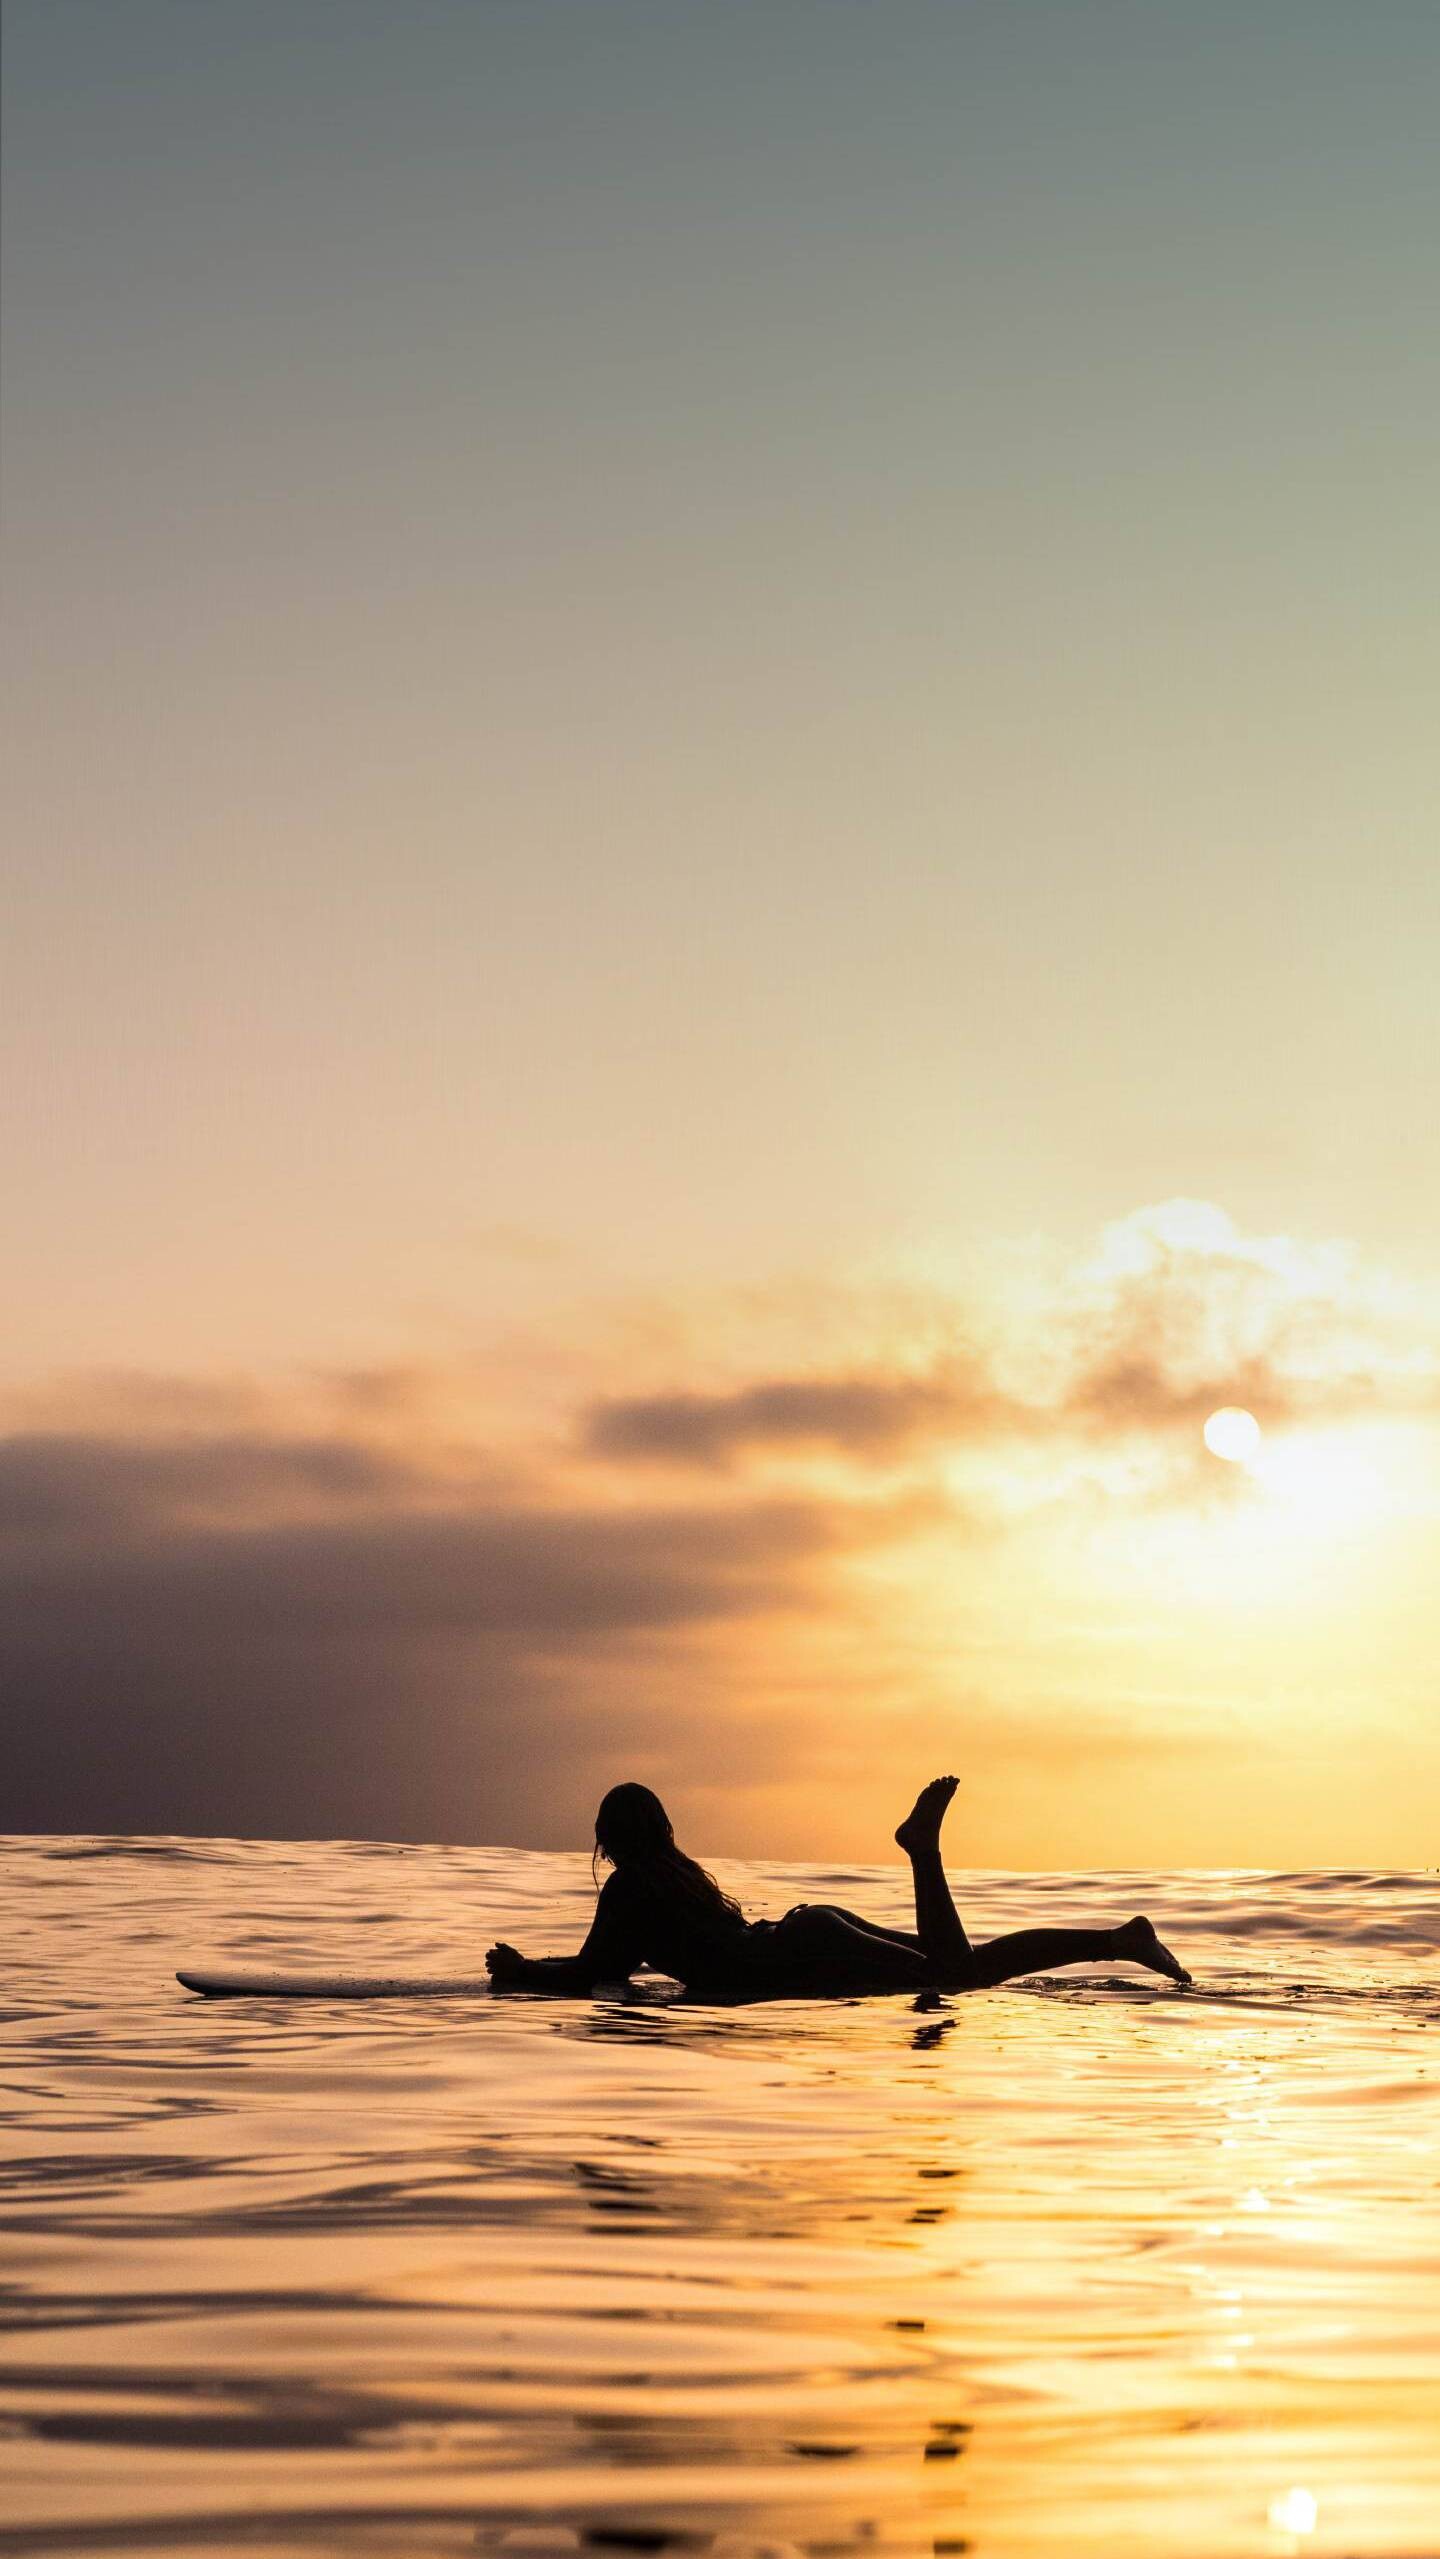 Girl Surfing: Outdoor vacation activity, Woman relaxing on a surfboard at sunset. 1440x2560 HD Background.